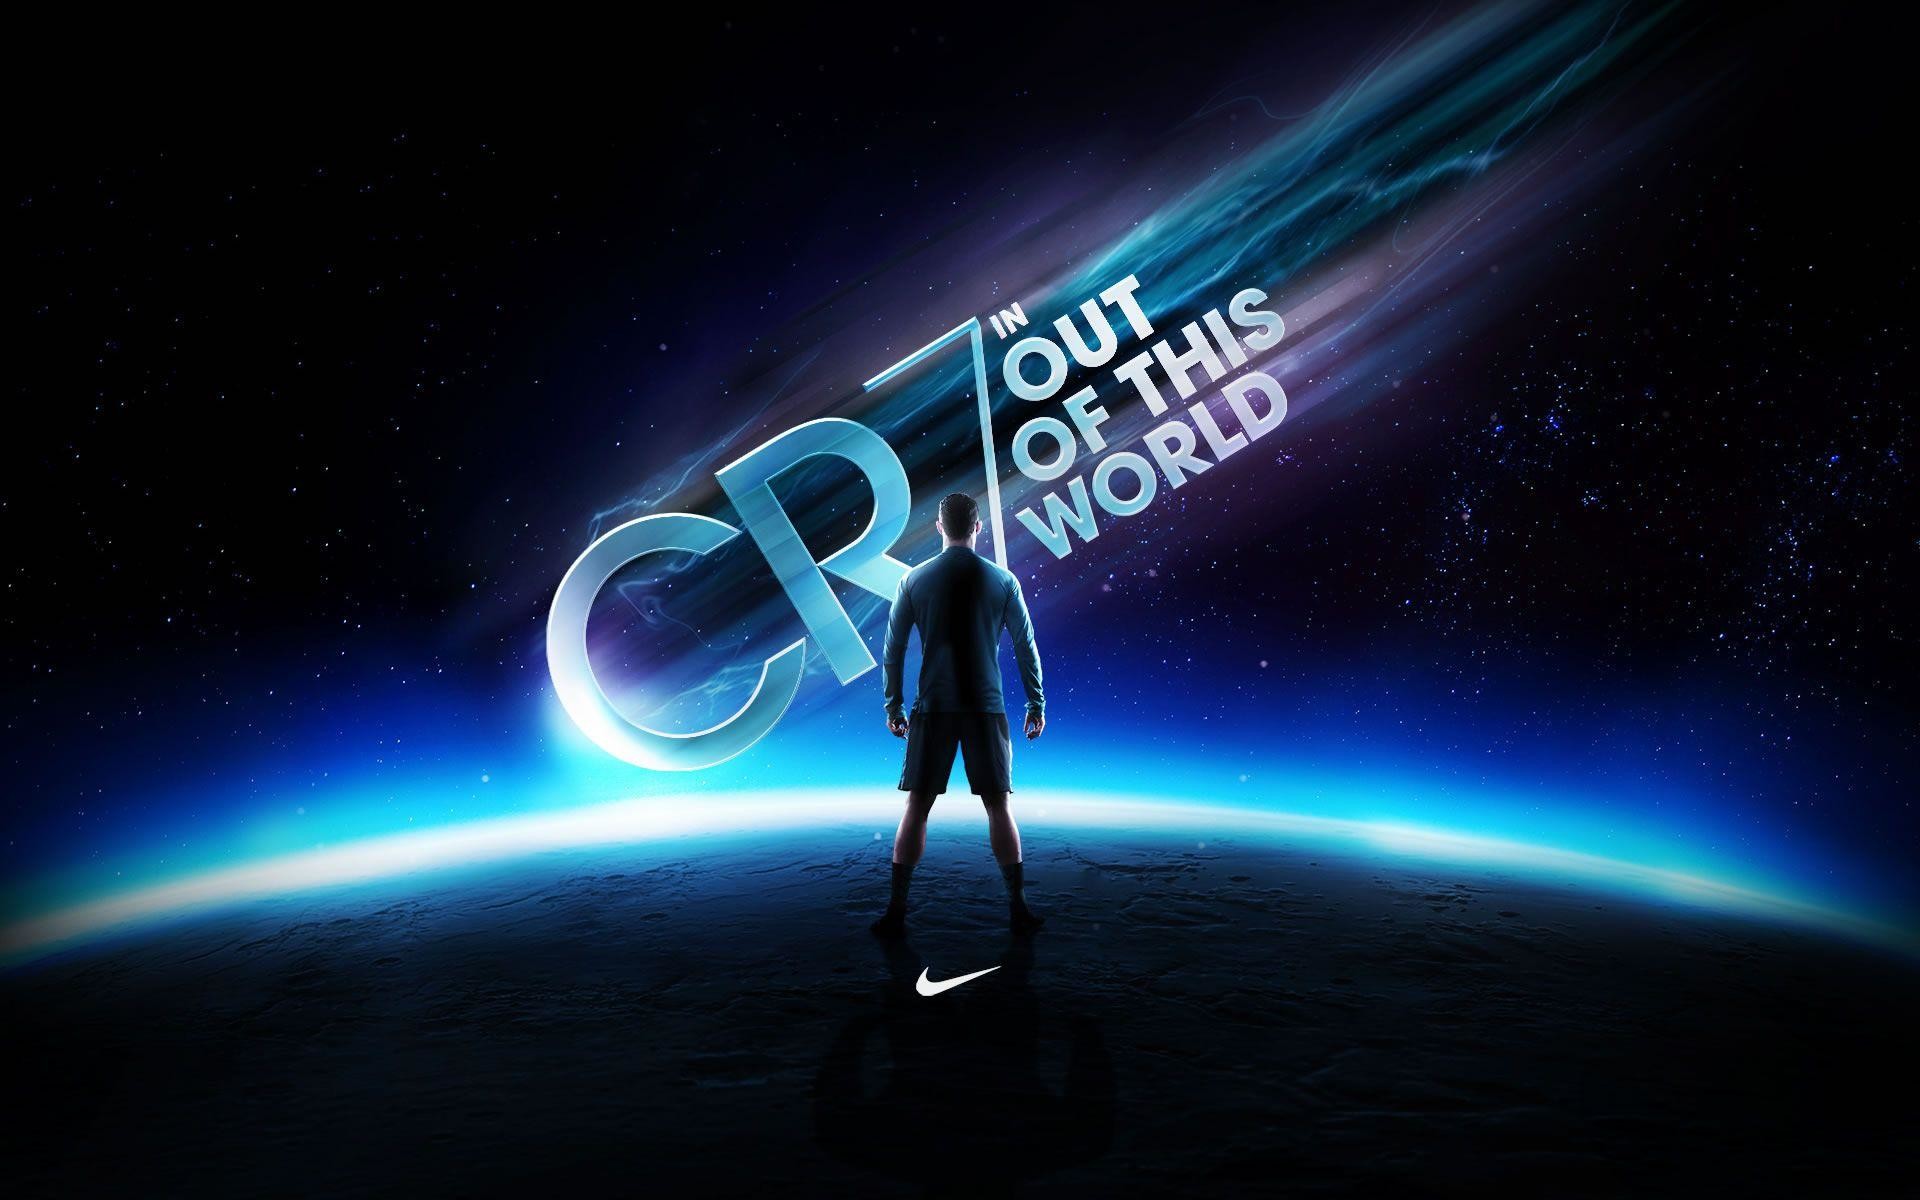 Cr7 Wallpaper 2018 79 Images HD Wallpapers Download Free Images Wallpaper [wallpaper981.blogspot.com]